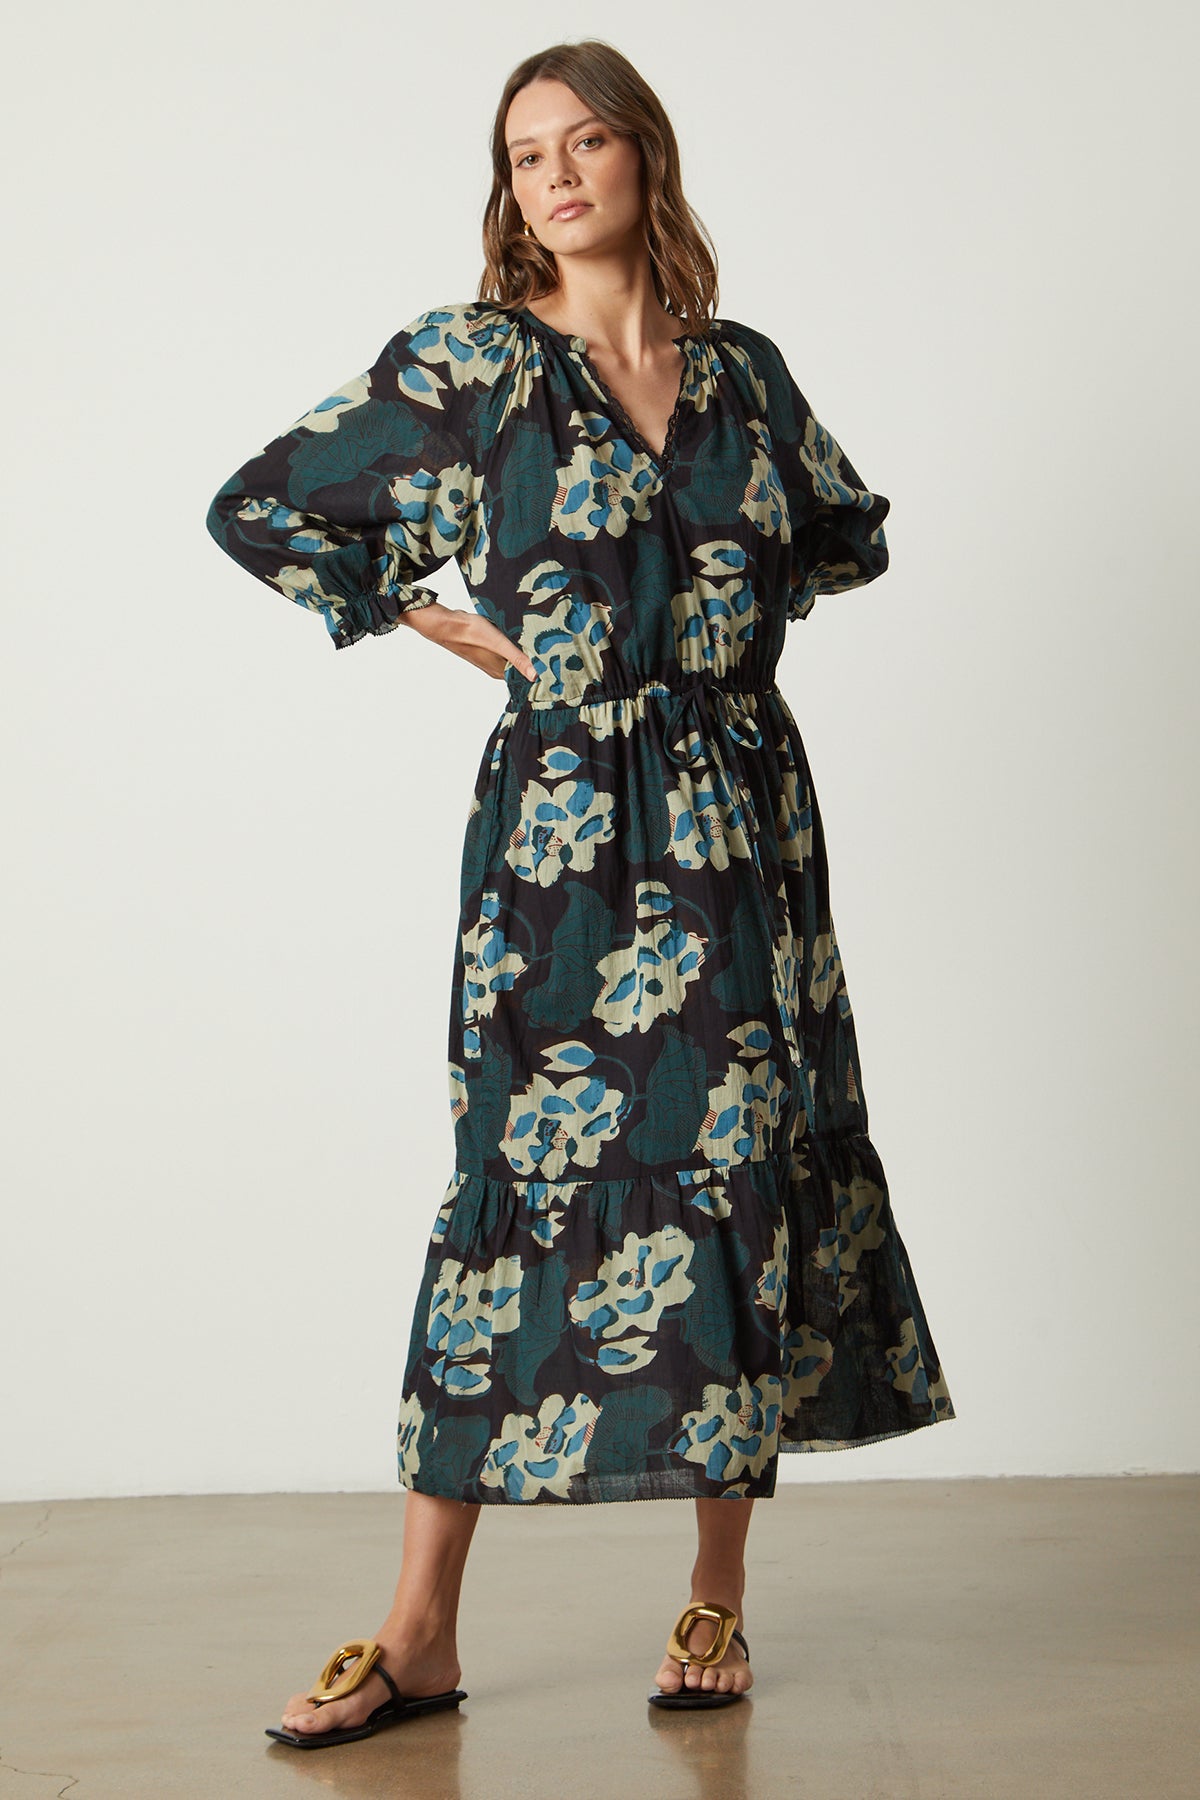 A woman wearing a Velvet by Graham & Spencer DENISE PRINTED COTTON LACE DRESS and sandals.-26022841614529